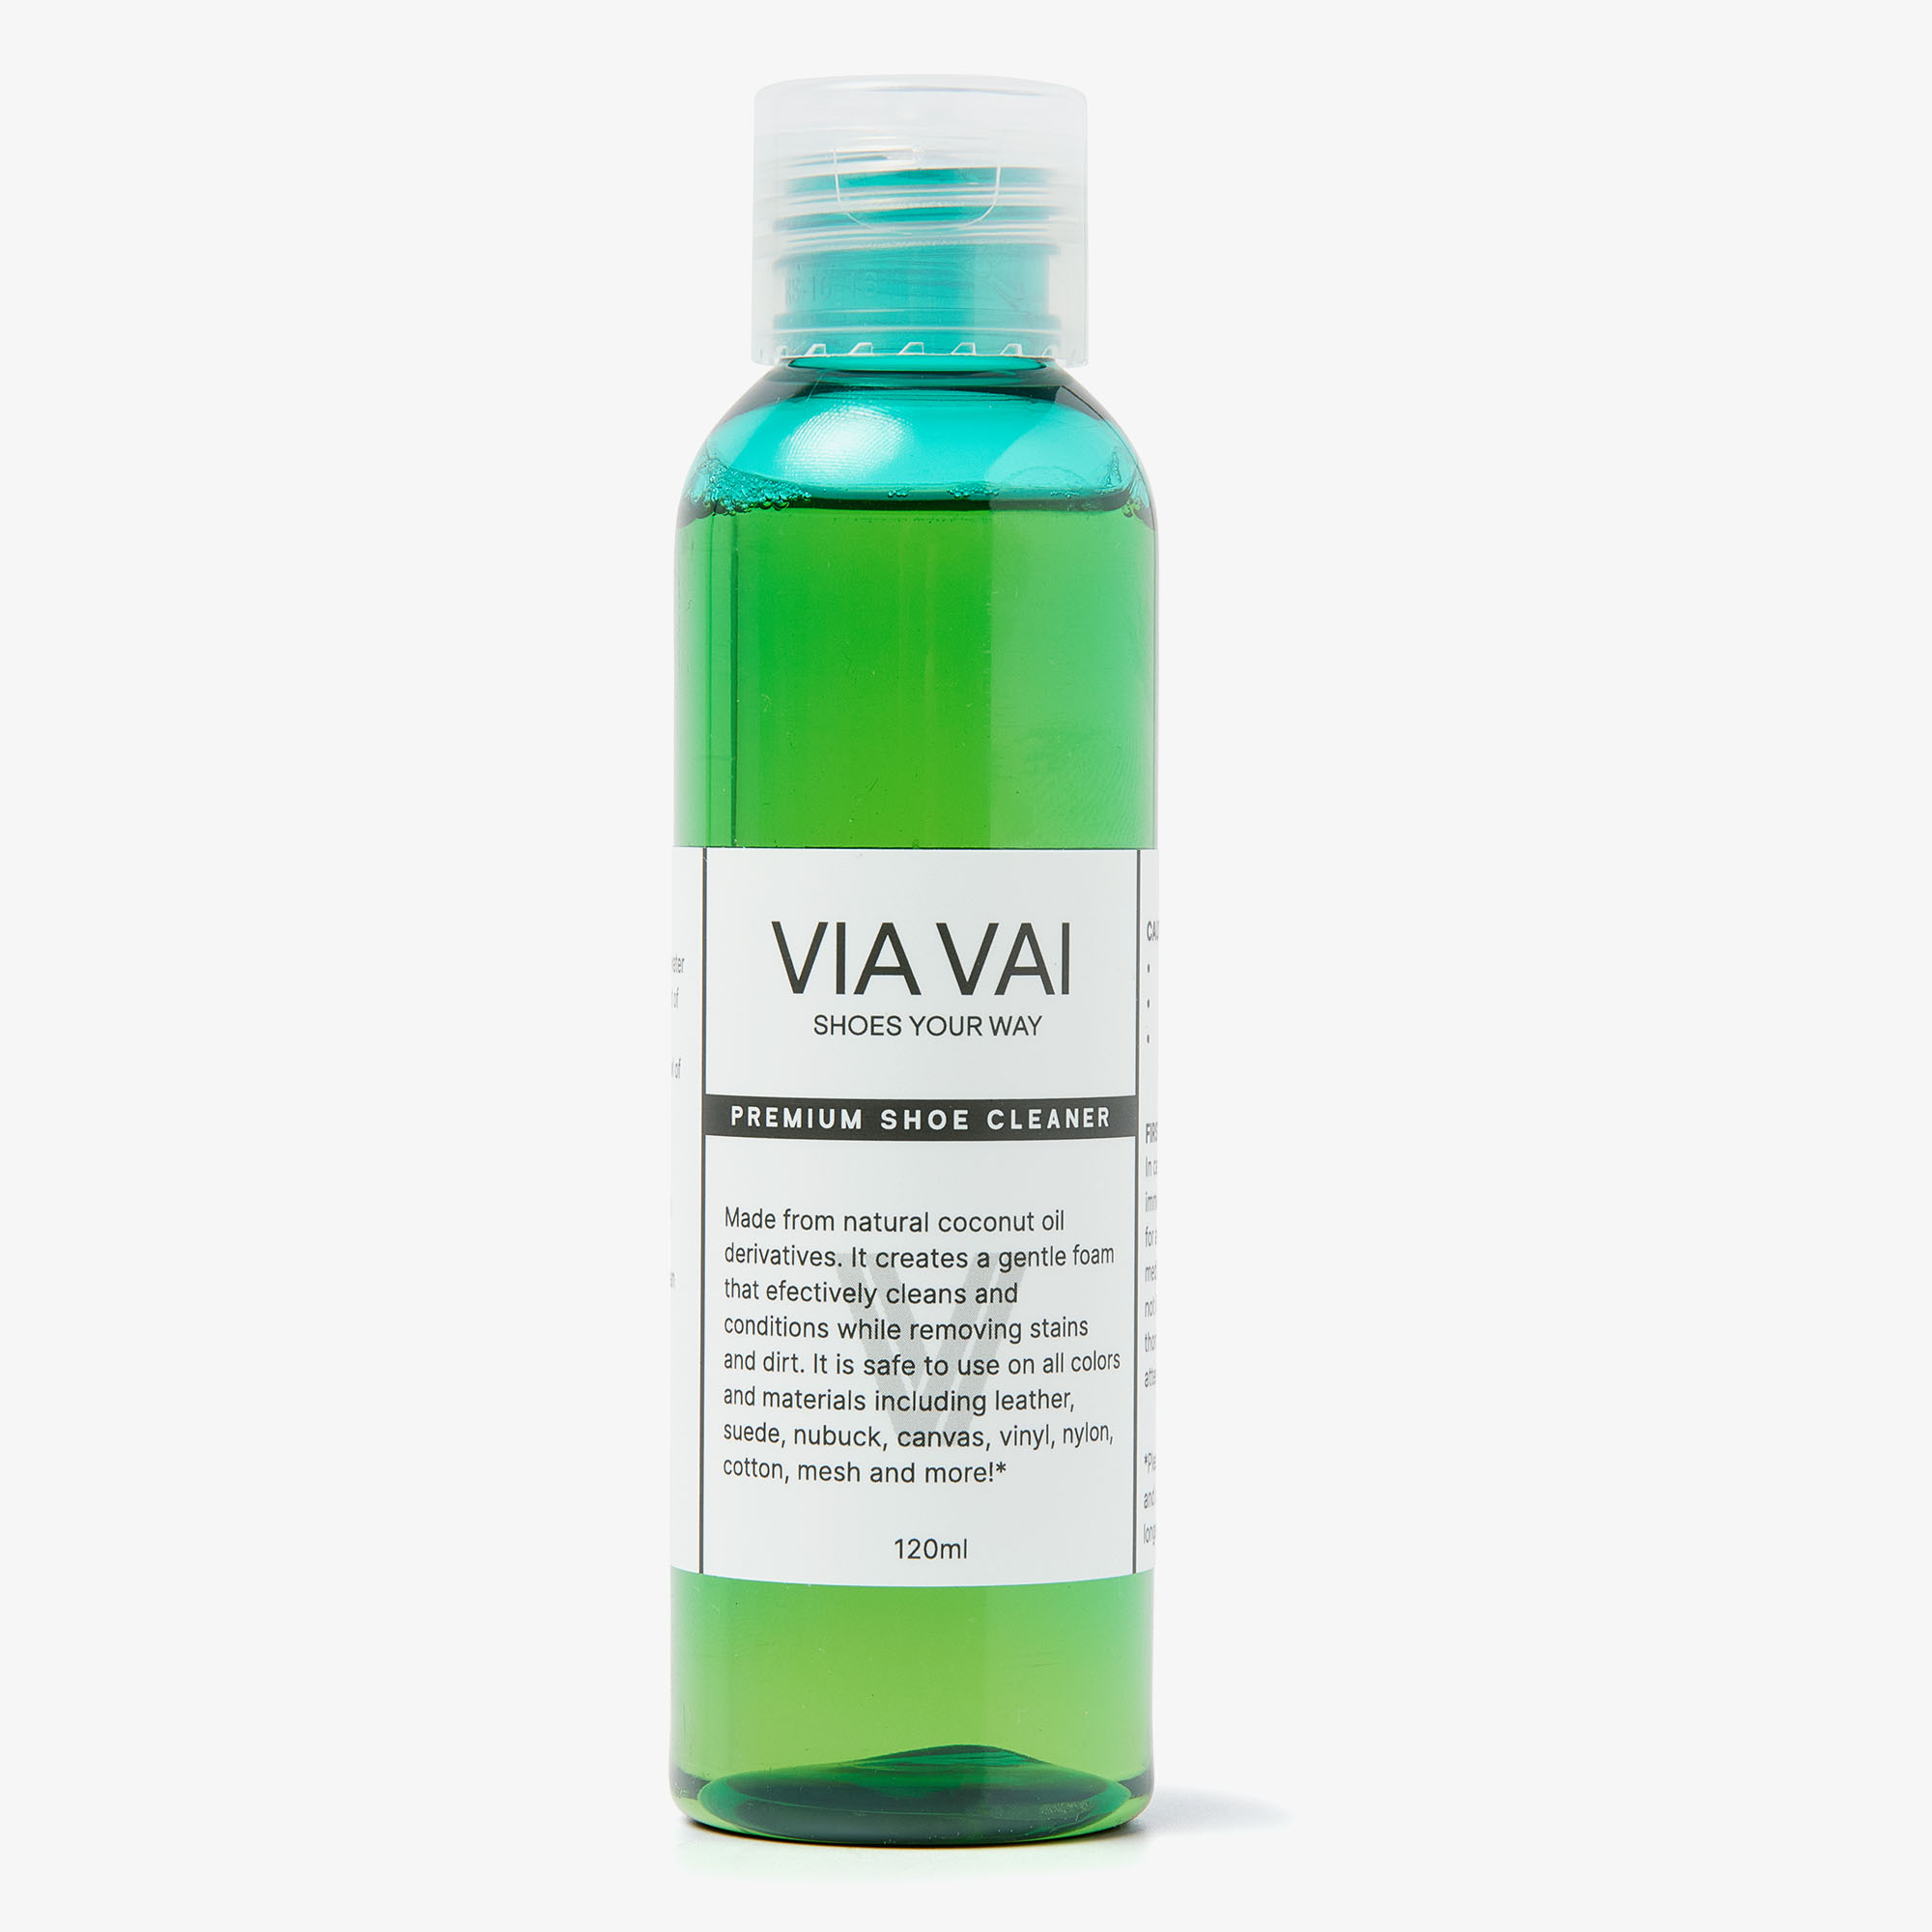 VIA VAI Shoe care Cleaning Solution dames -